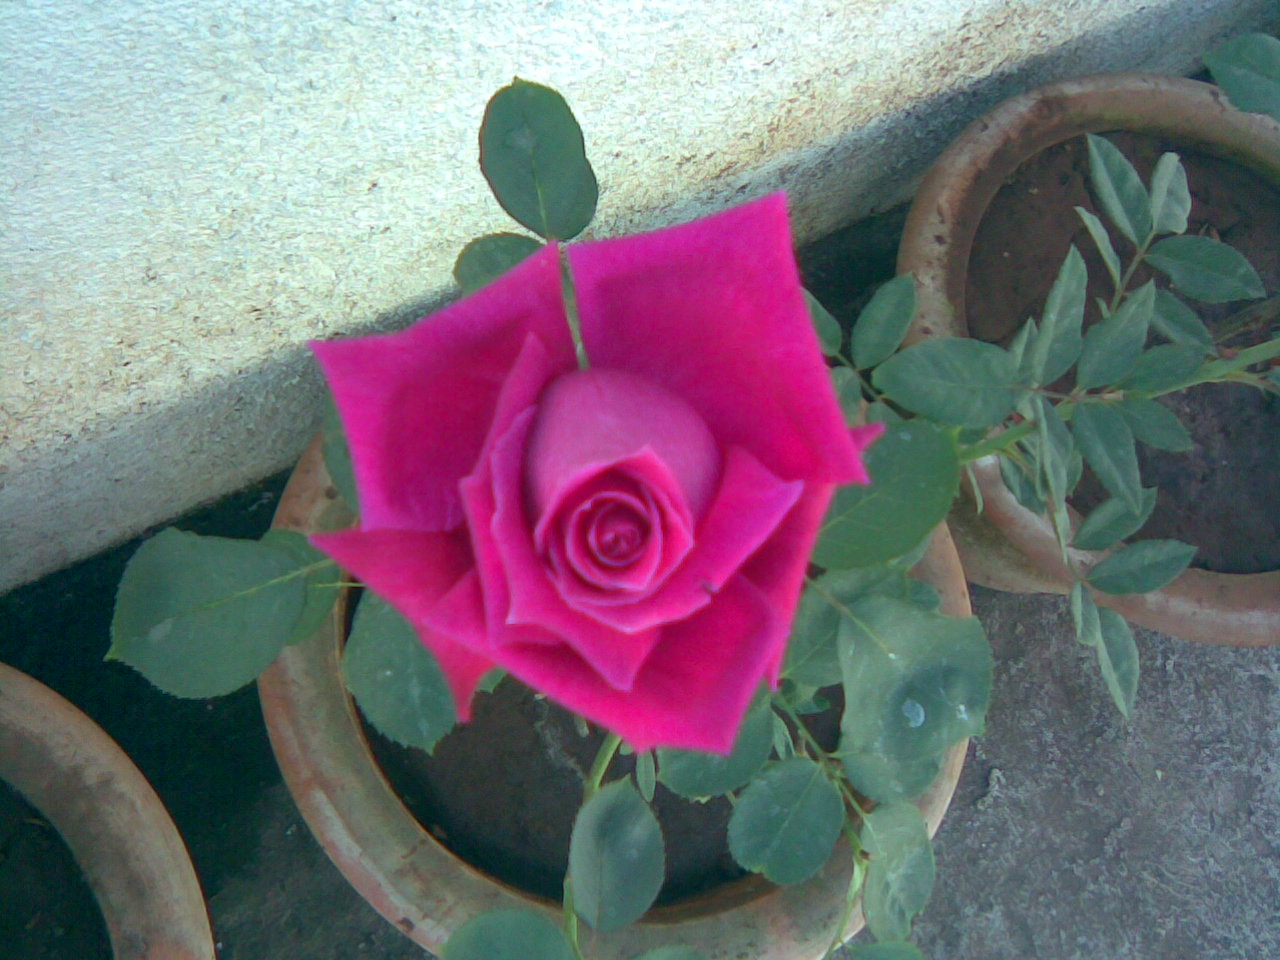 http://3.bp.blogspot.com/-wJh5RMkqMFs/TcU4BIeMaoI/AAAAAAAABJ8/5aCArI0-aQE/s1600/The+most+beatiful+picture+of+rose+free+rose+wallpapers+and+images+free+flower+images.jpg